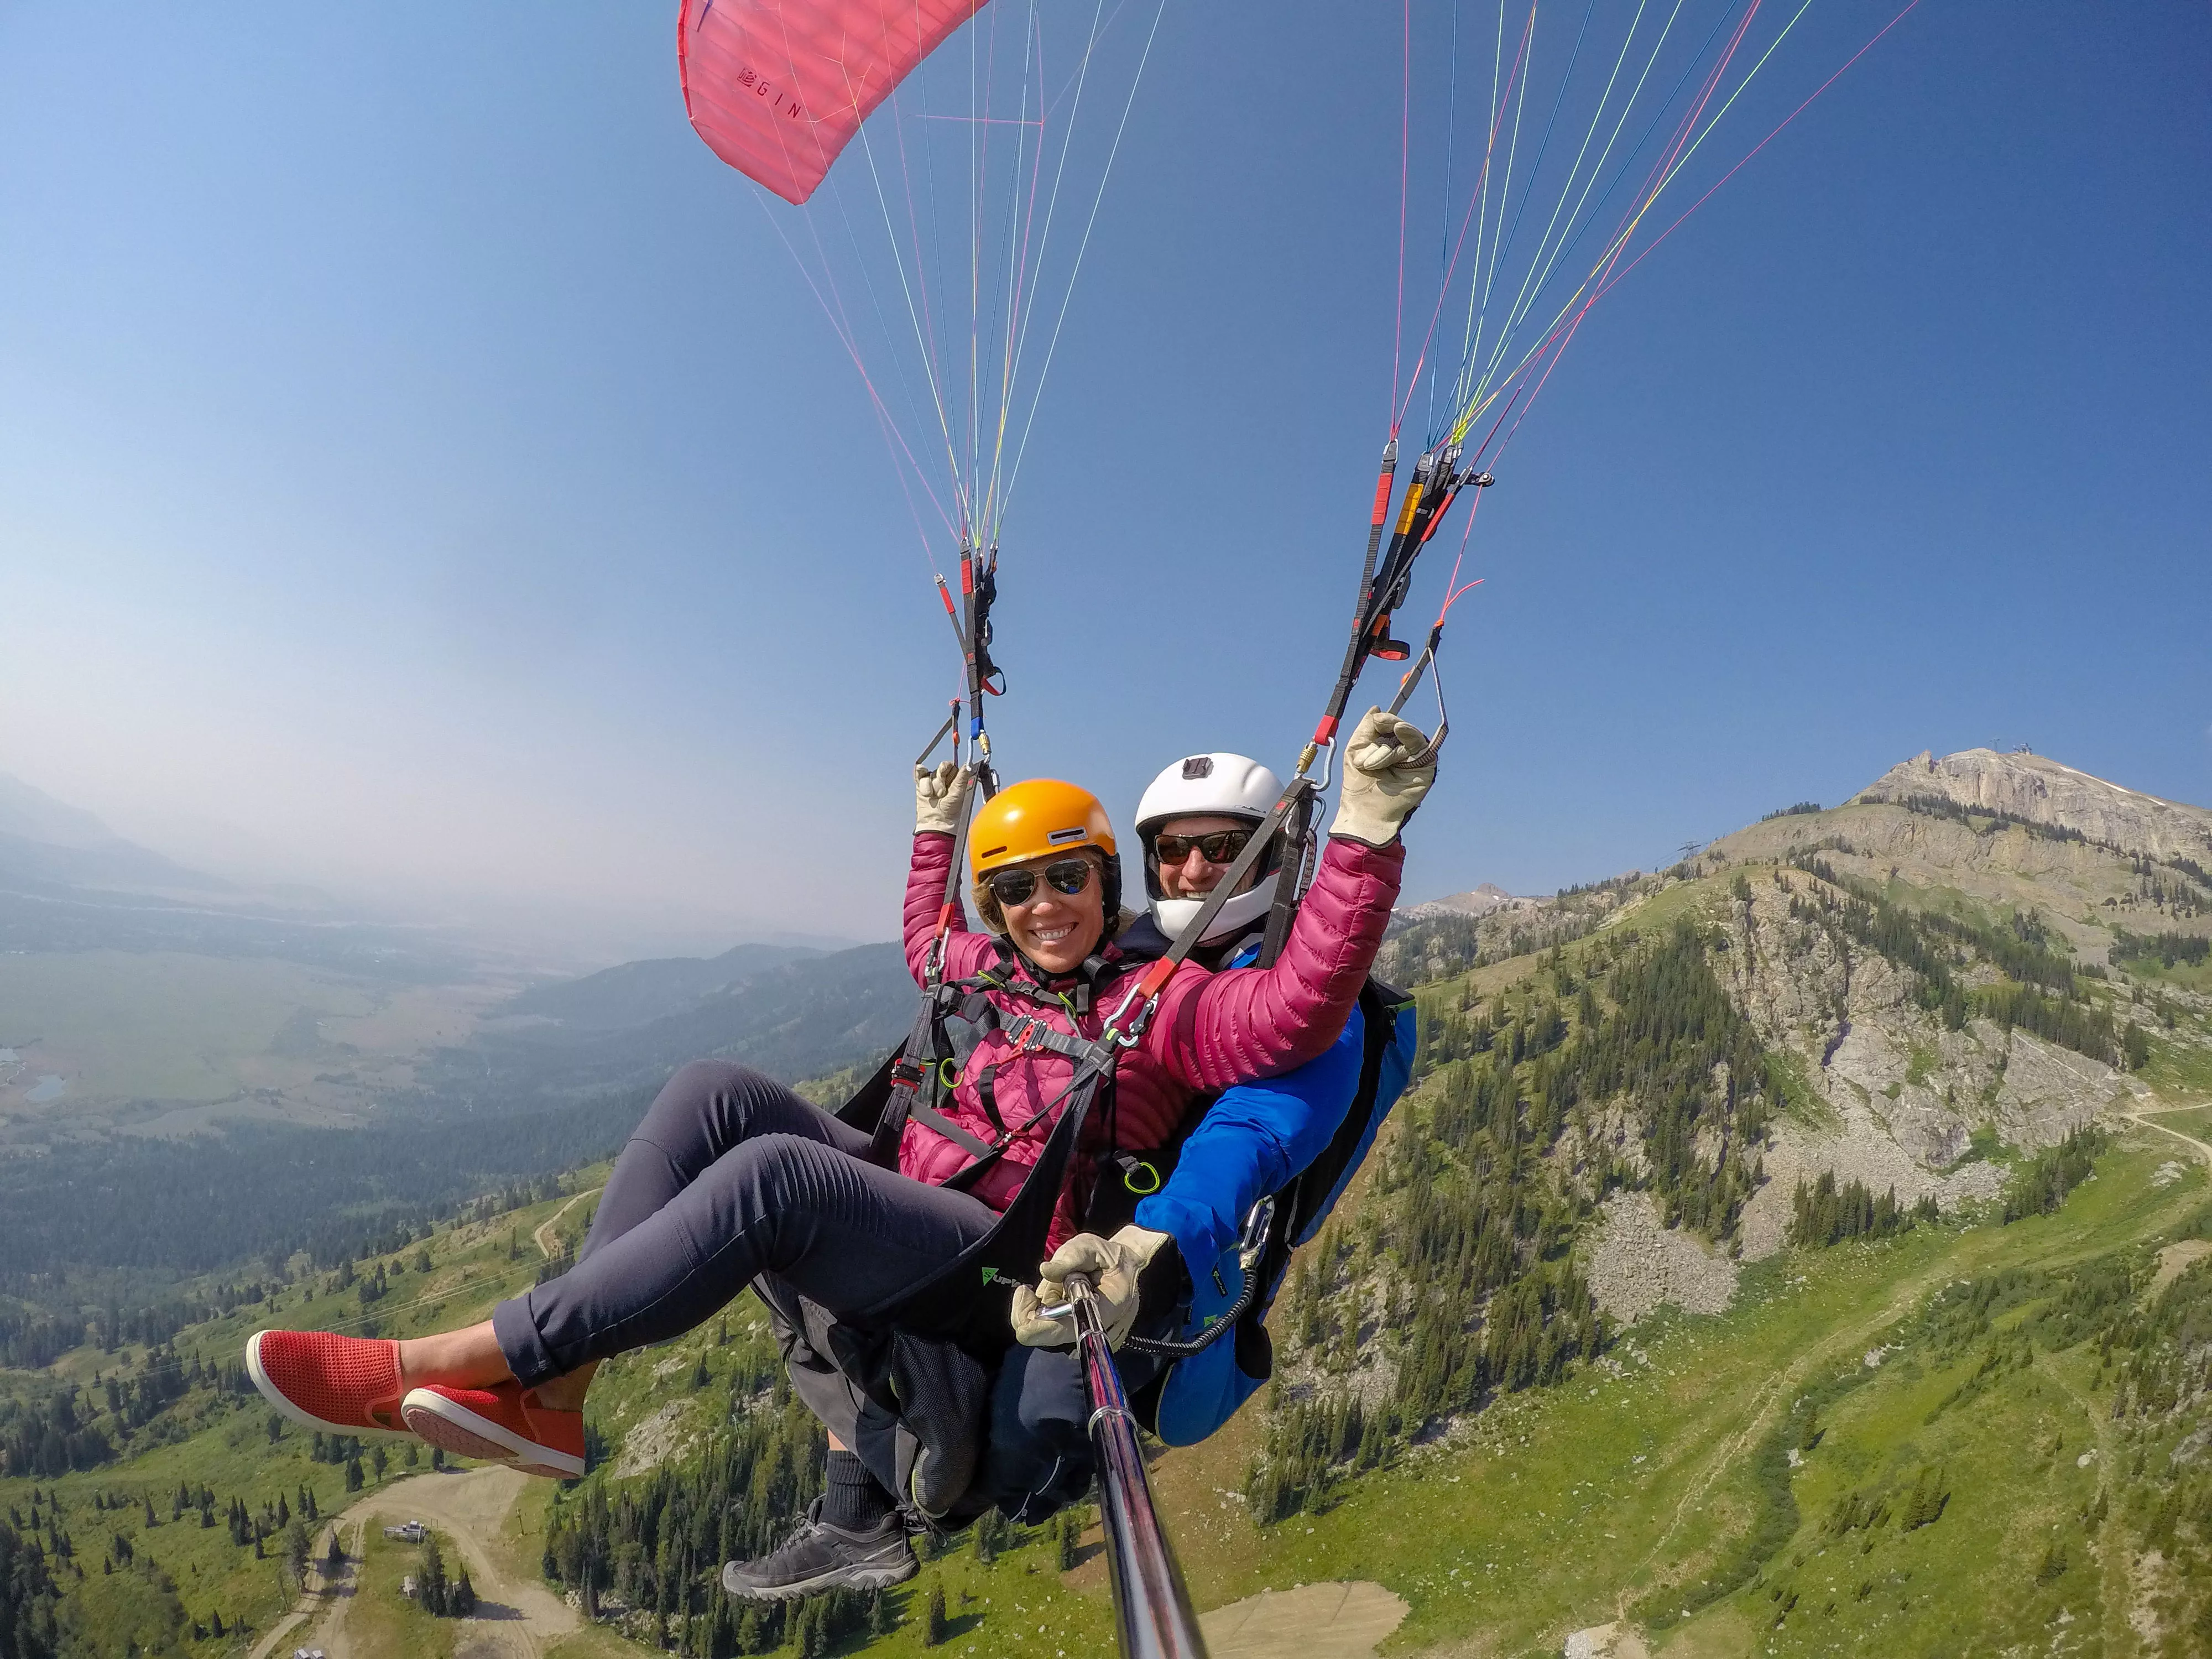 Jackson Hole Paragliding in USA, North America | Paragliding - Rated 1.1